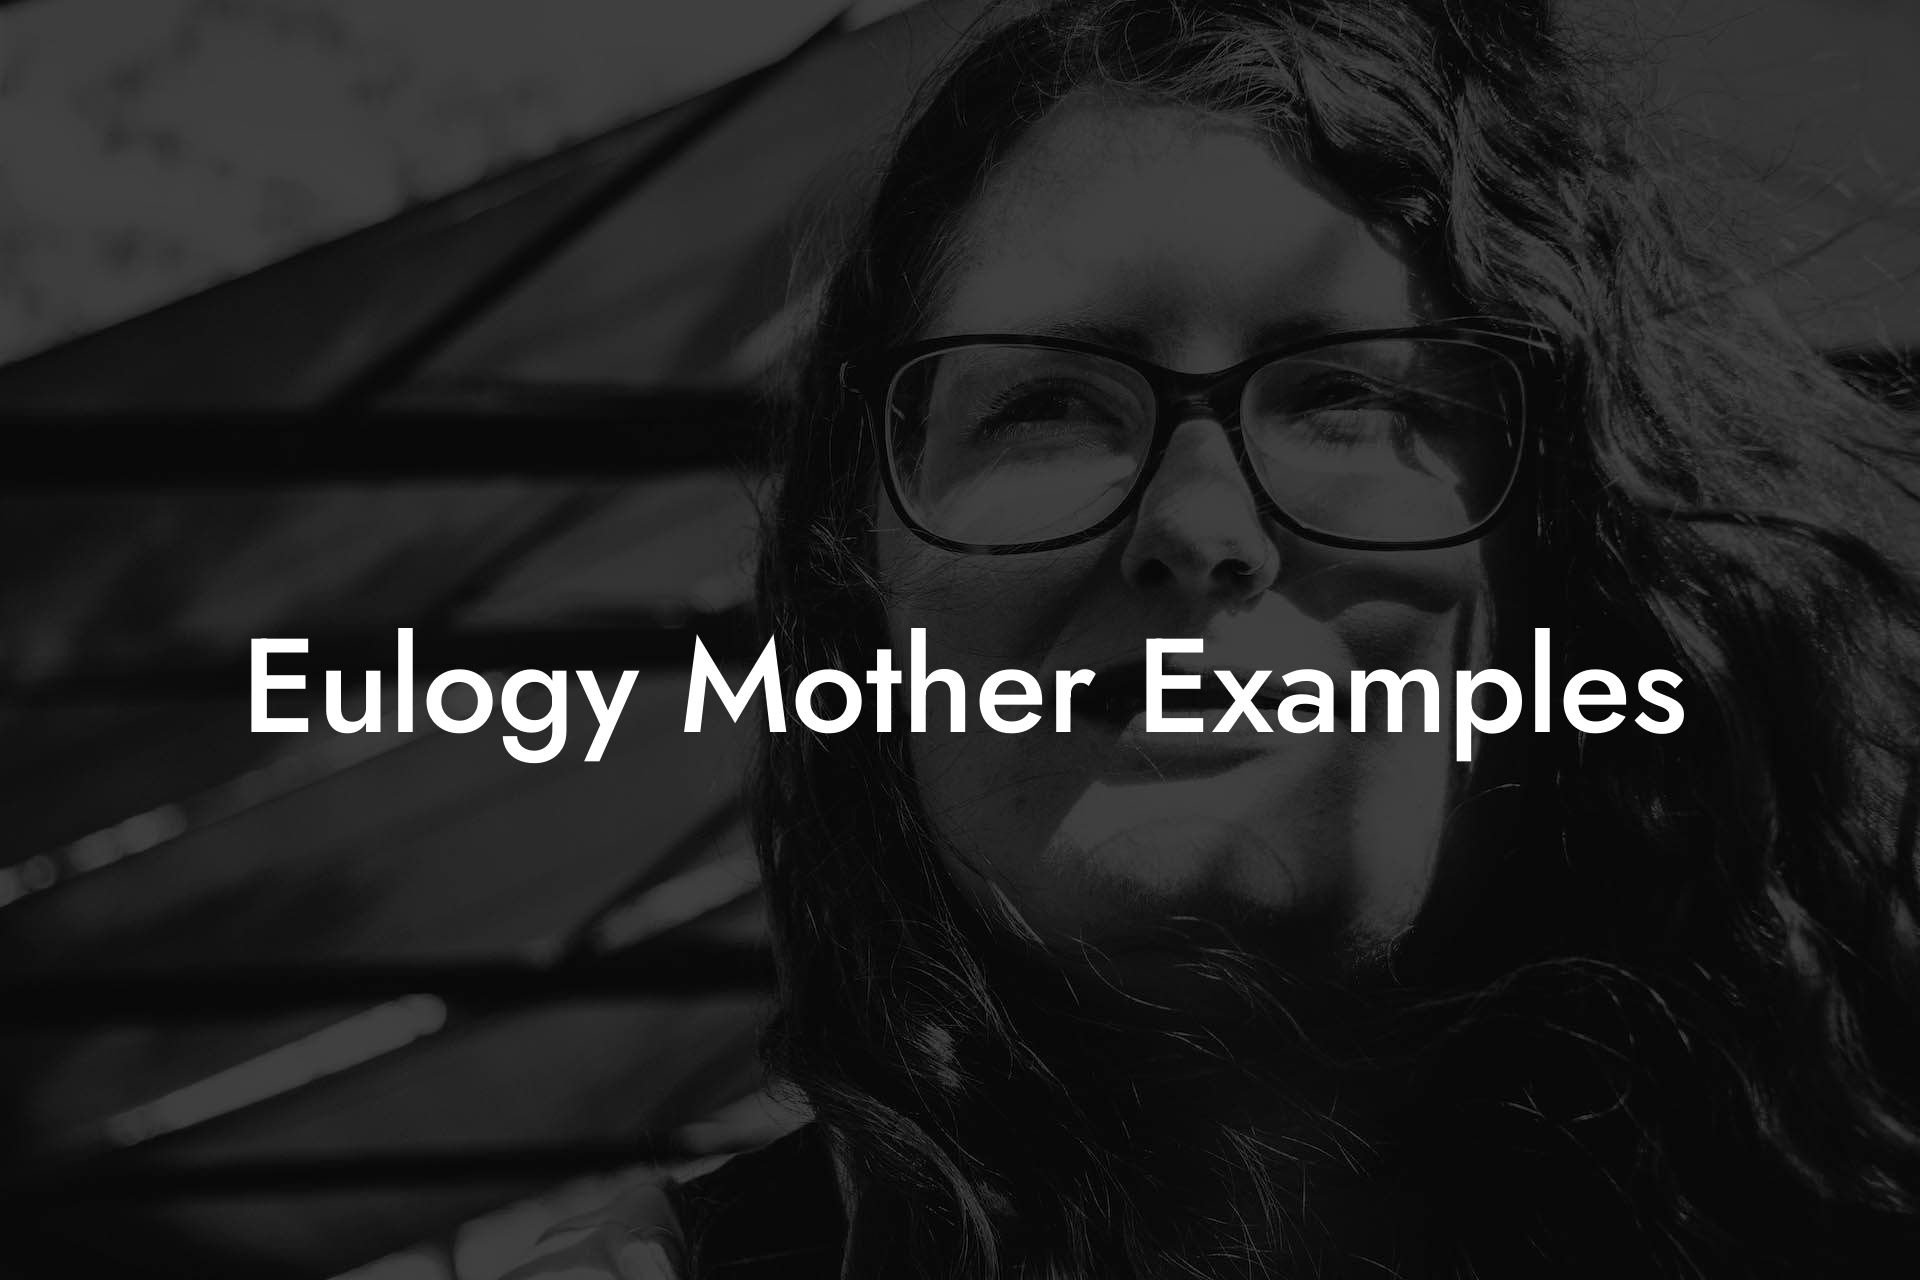 Eulogy Mother Examples